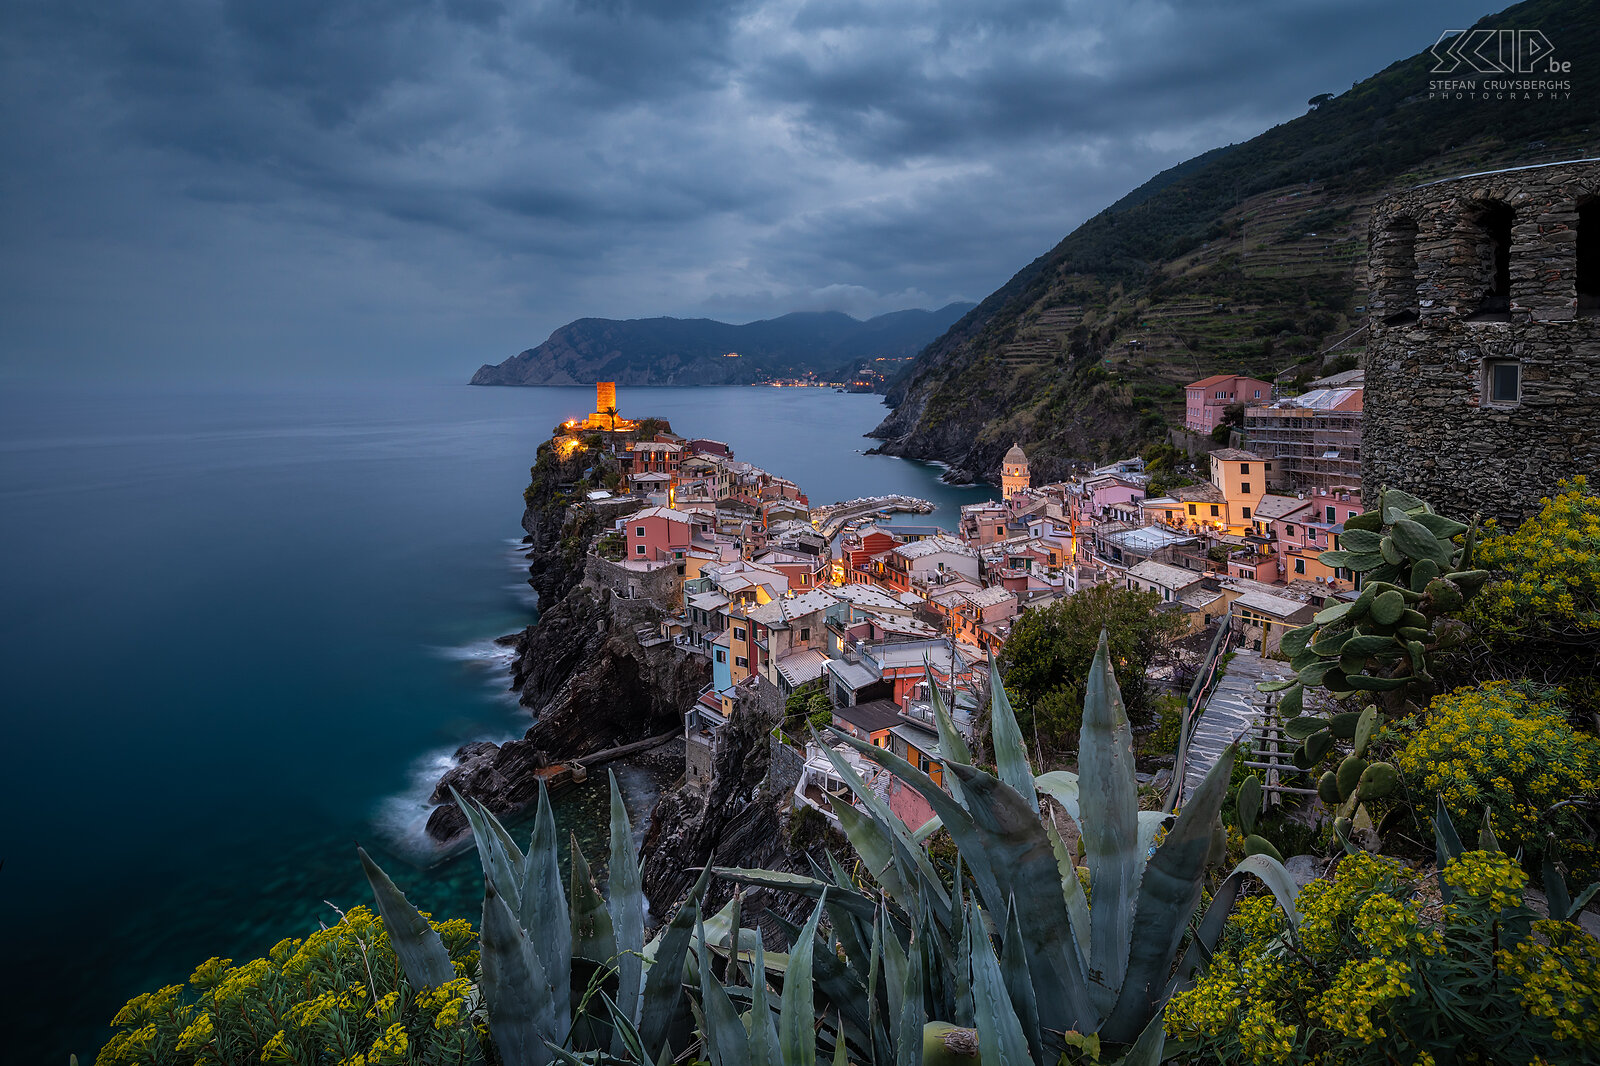 Vernazza - Blue hour Vernazza is one of the five villages of Cinque Terre. It has beautifully colored houses and a particularly lovely harbor and bay. This photo was taken from a well-known photo location on a south-facing slope during blue hour on an overcast evening. Stefan Cruysberghs